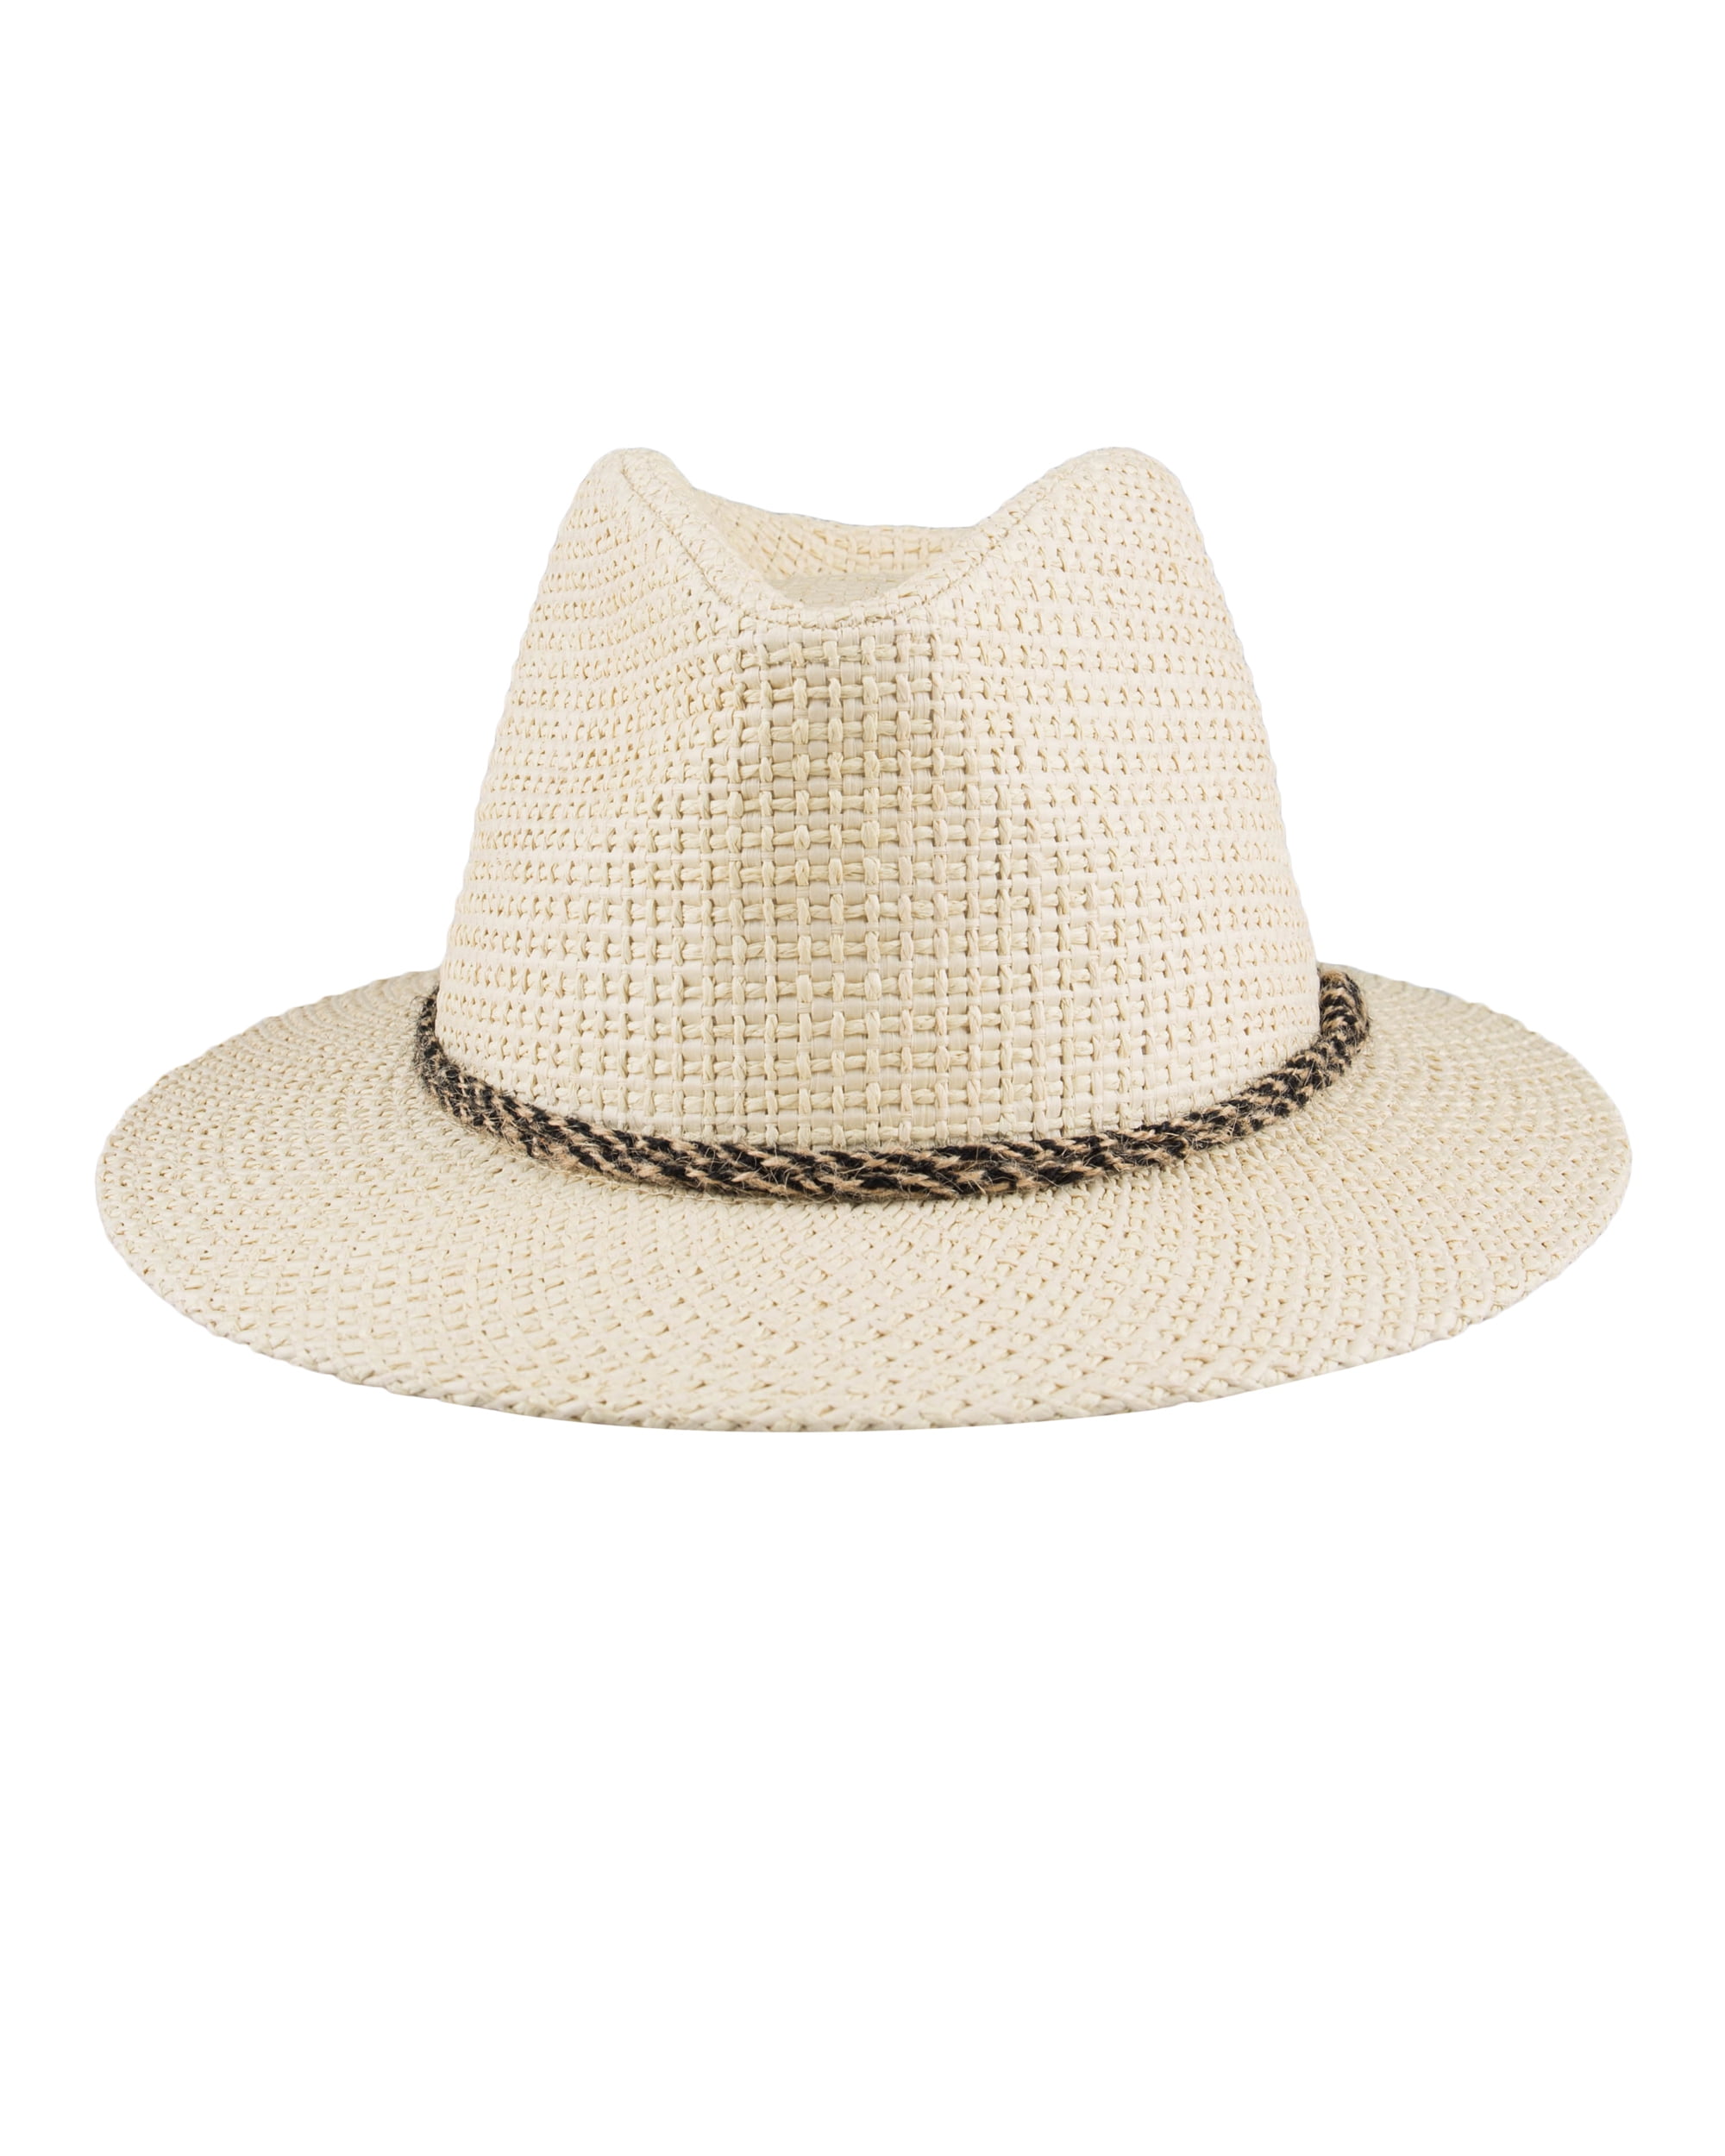 Levi's Men's Panama Hat with Twisted Band 